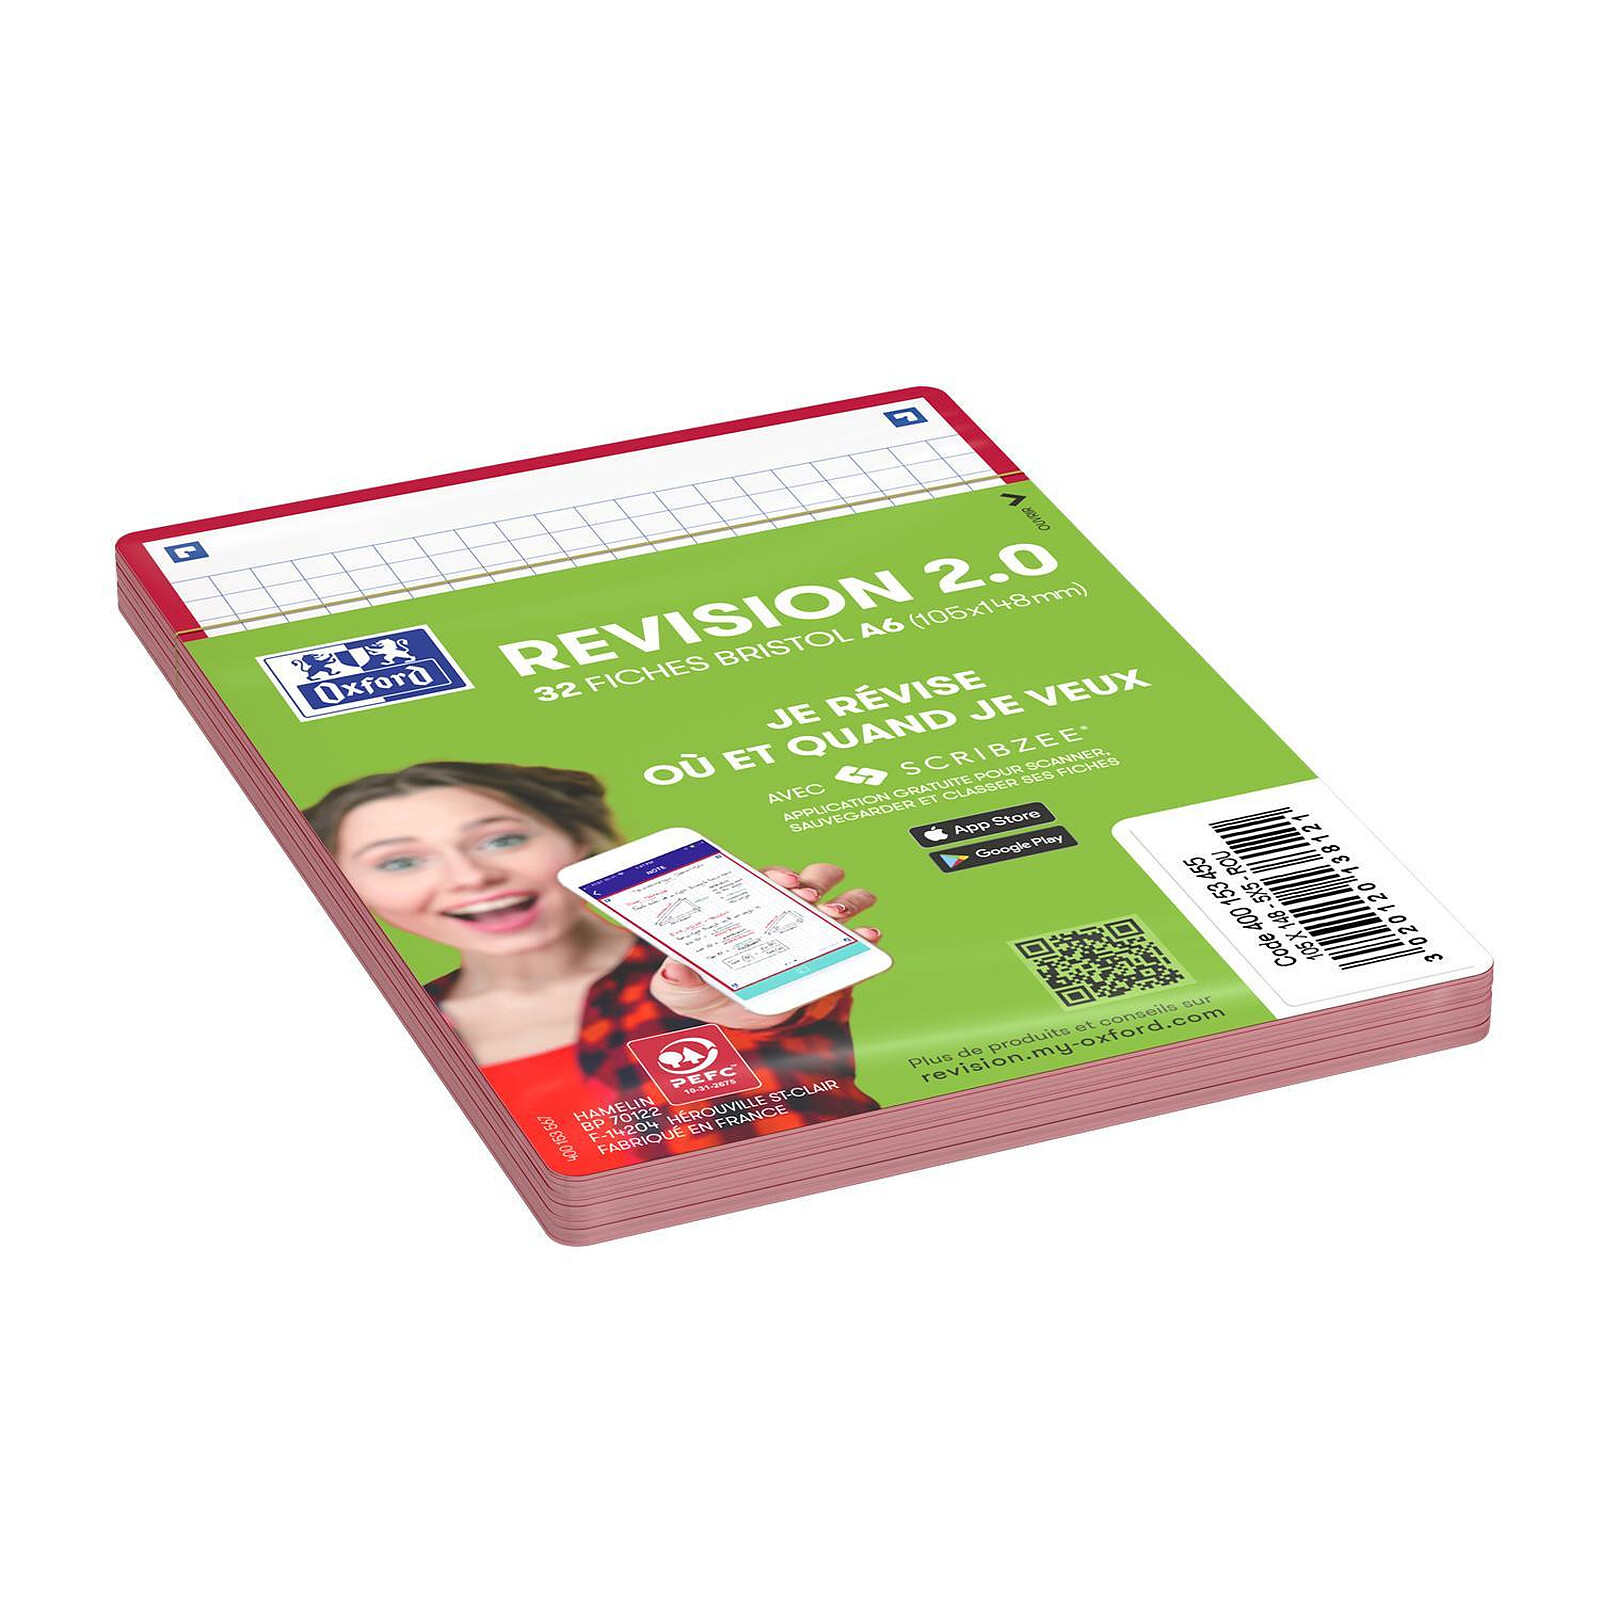 HYPERBURO  FICHES BRISTOL OXFORD REVISION 2.0 A6 NON PERFOREE 32 FICHES/FILM  Q5X5 COULEURS ASSORTIES